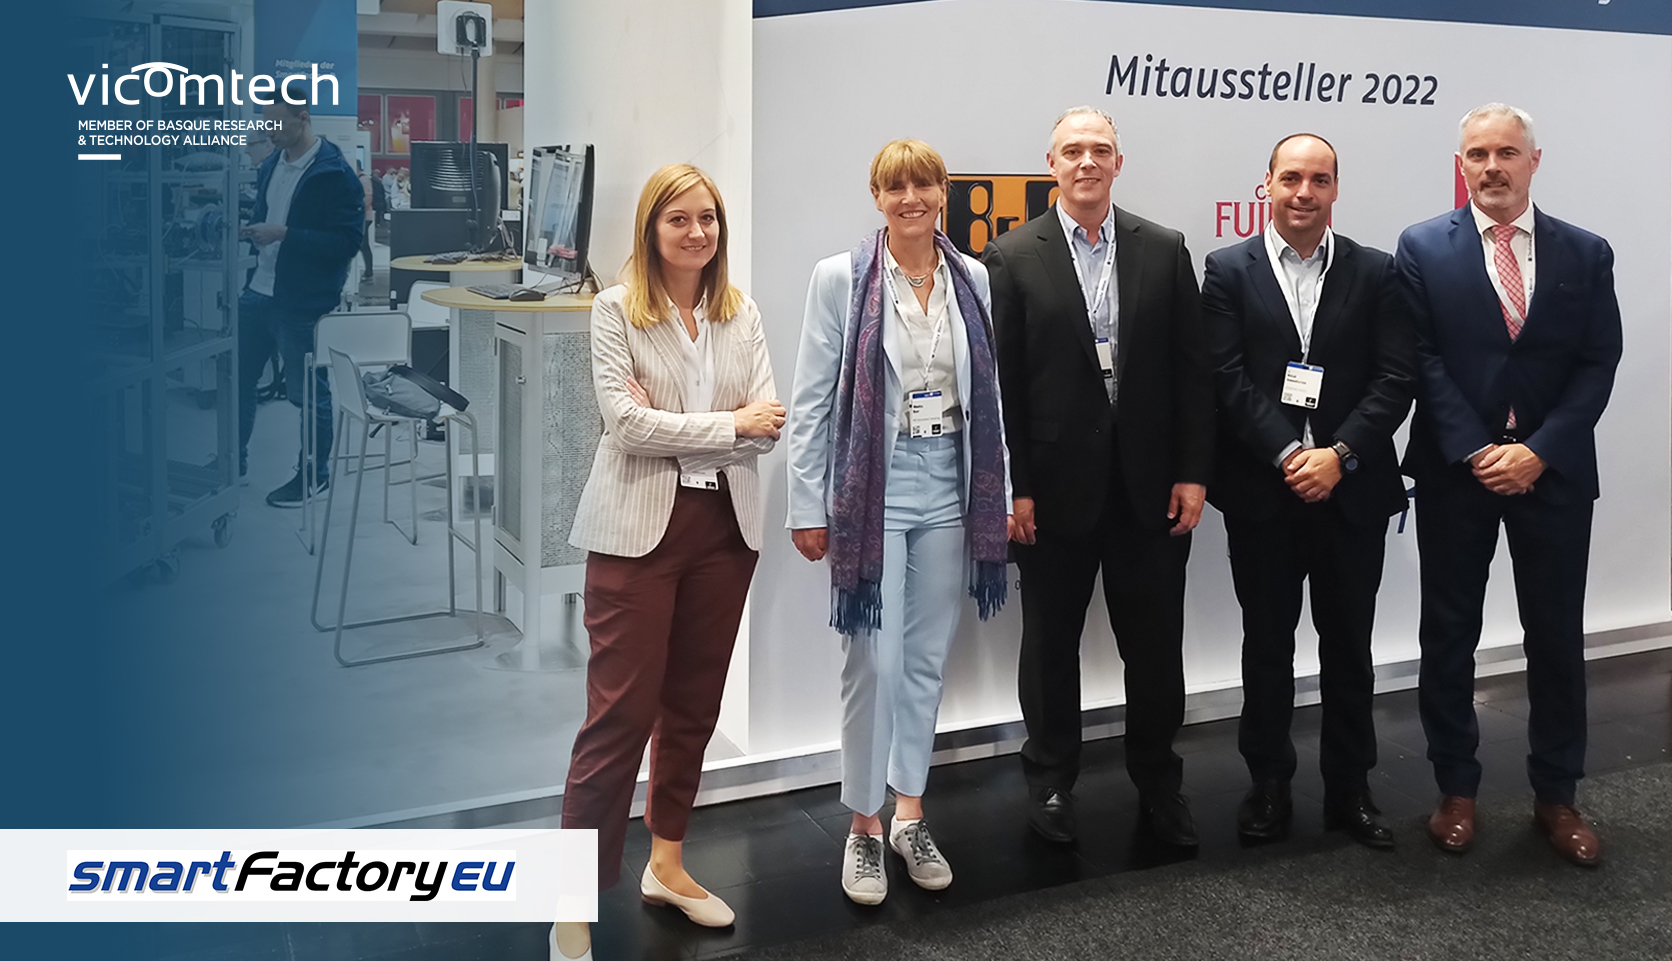 Vicomtech participates in the prestigious Hannover Messe 2022 with its partner SmartFactory-KL